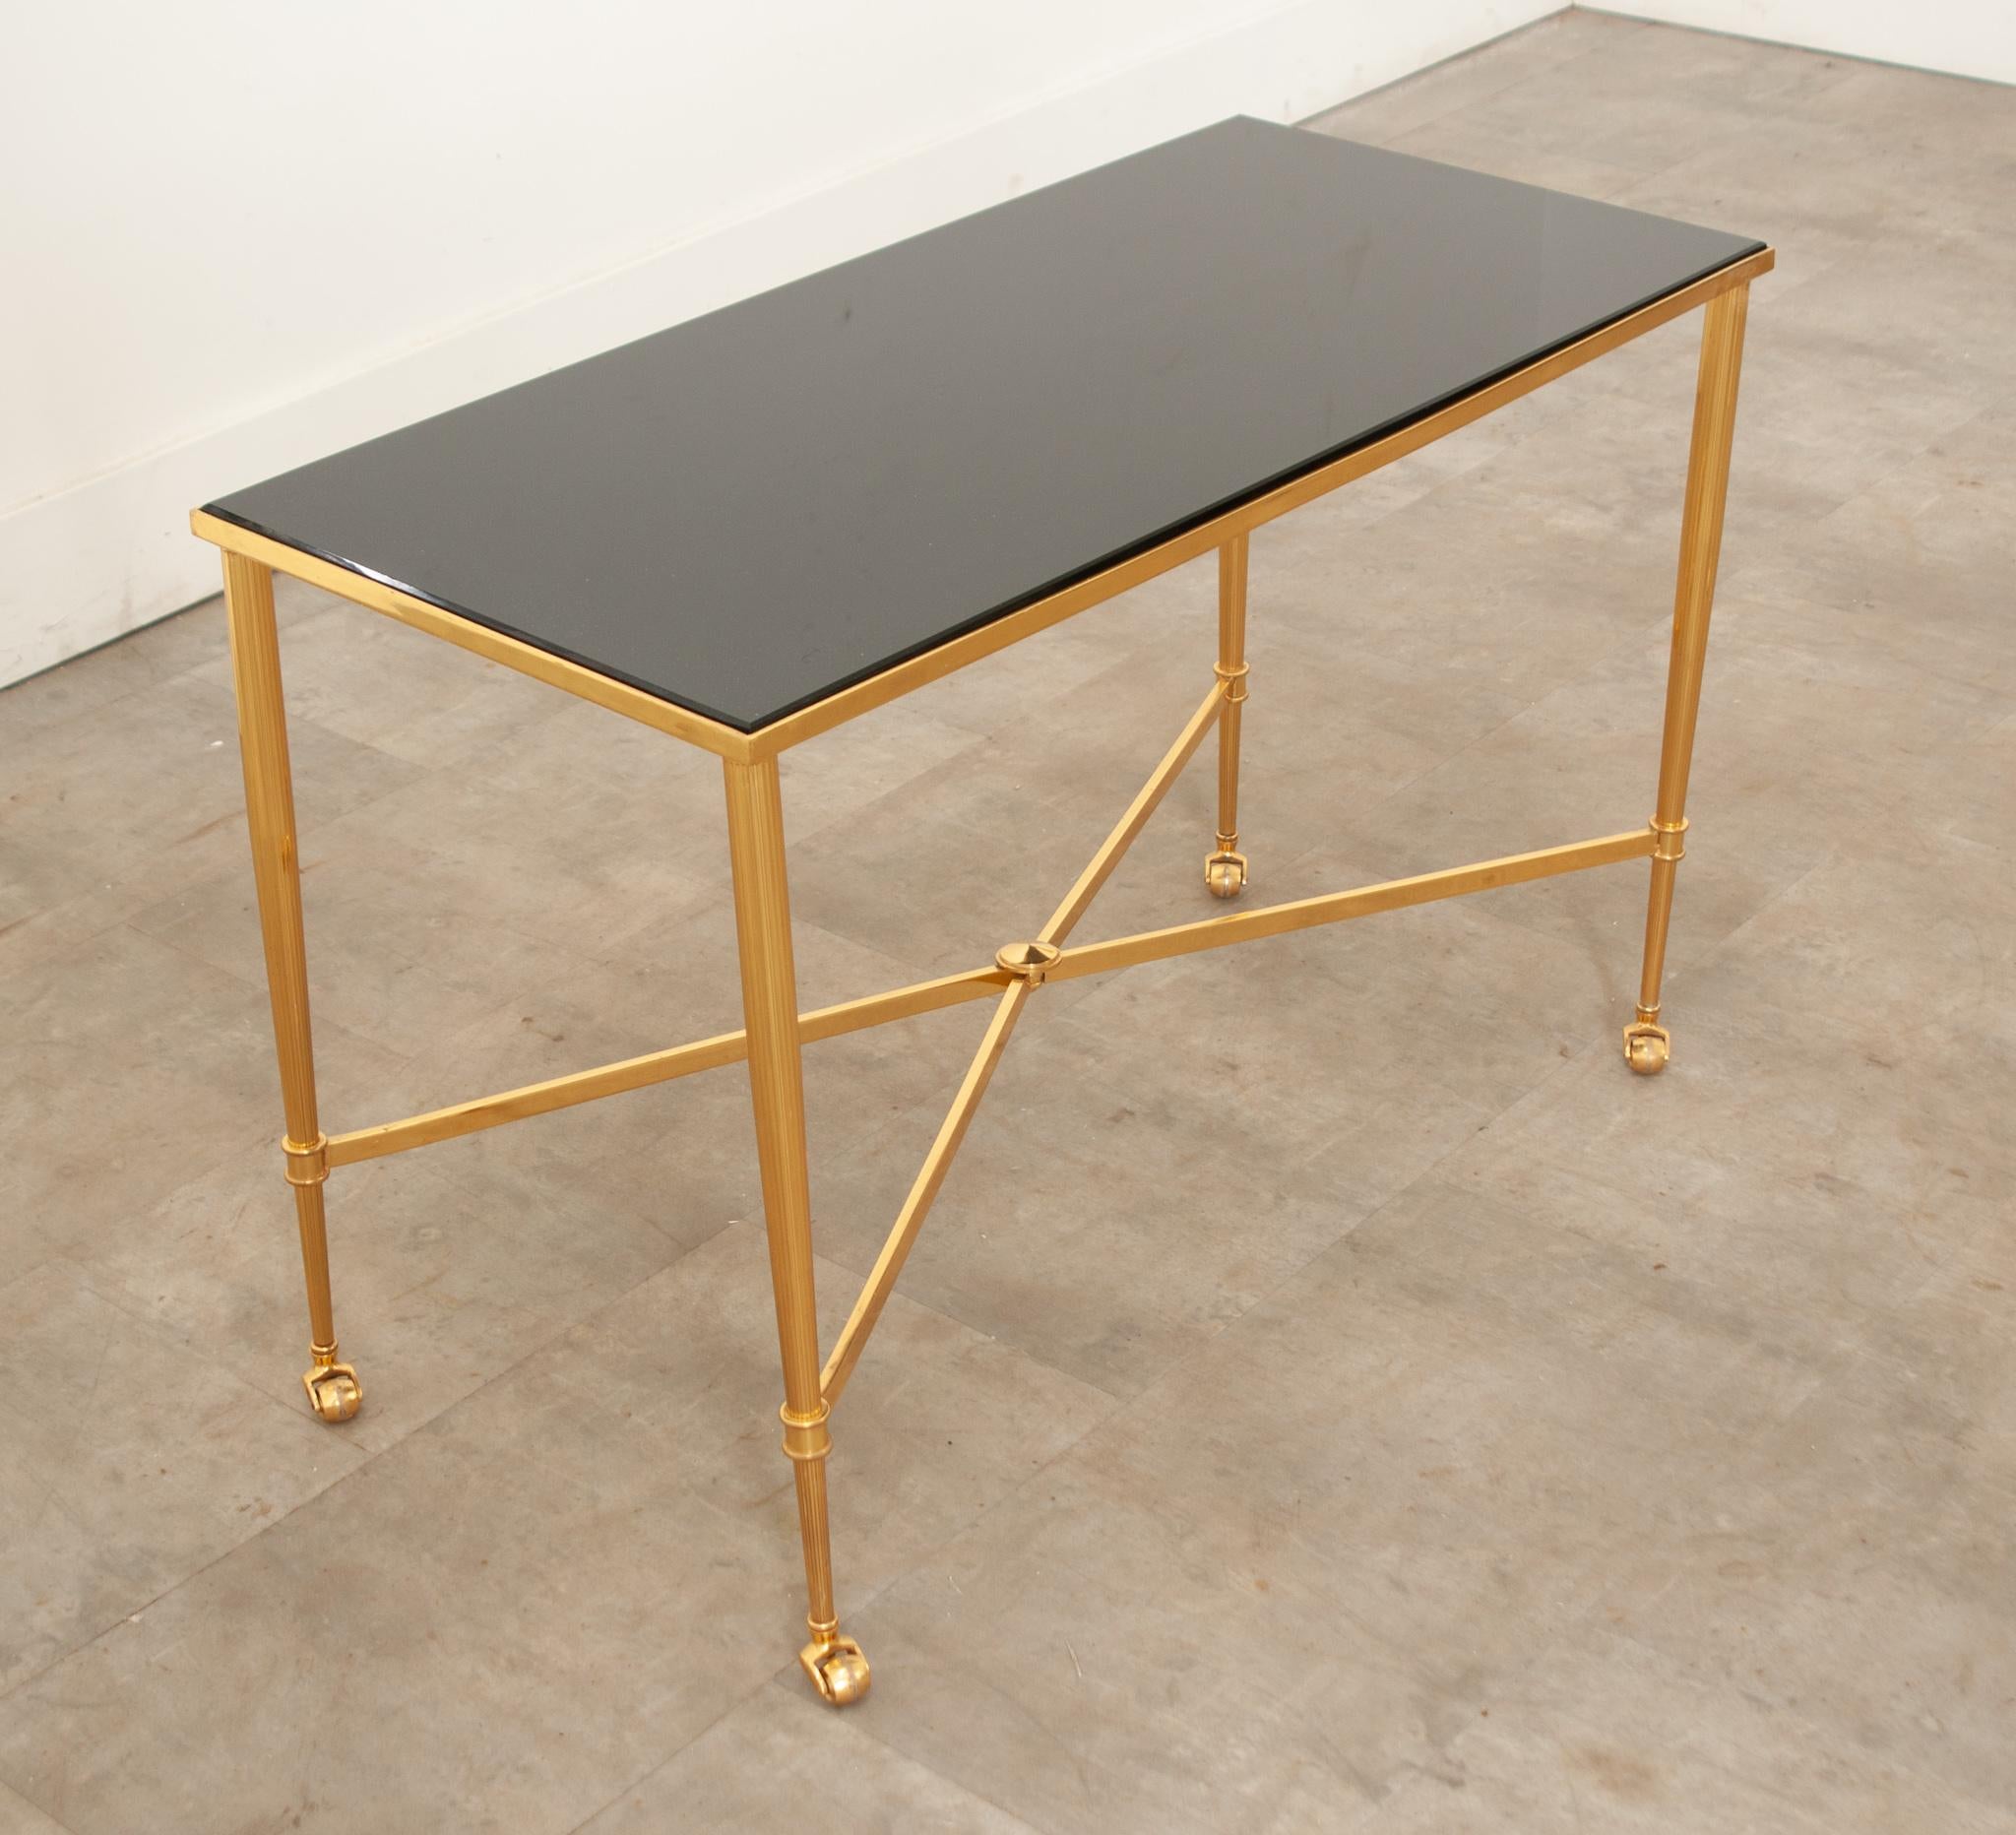 A sophisticated French brass cocktail table in the style of Masion Jansen. Topped with a removable inset black stone over tapered legs connected to an X-shaped stretcher with smooth rolling casters. Vibrant and stunning, this table will add class to